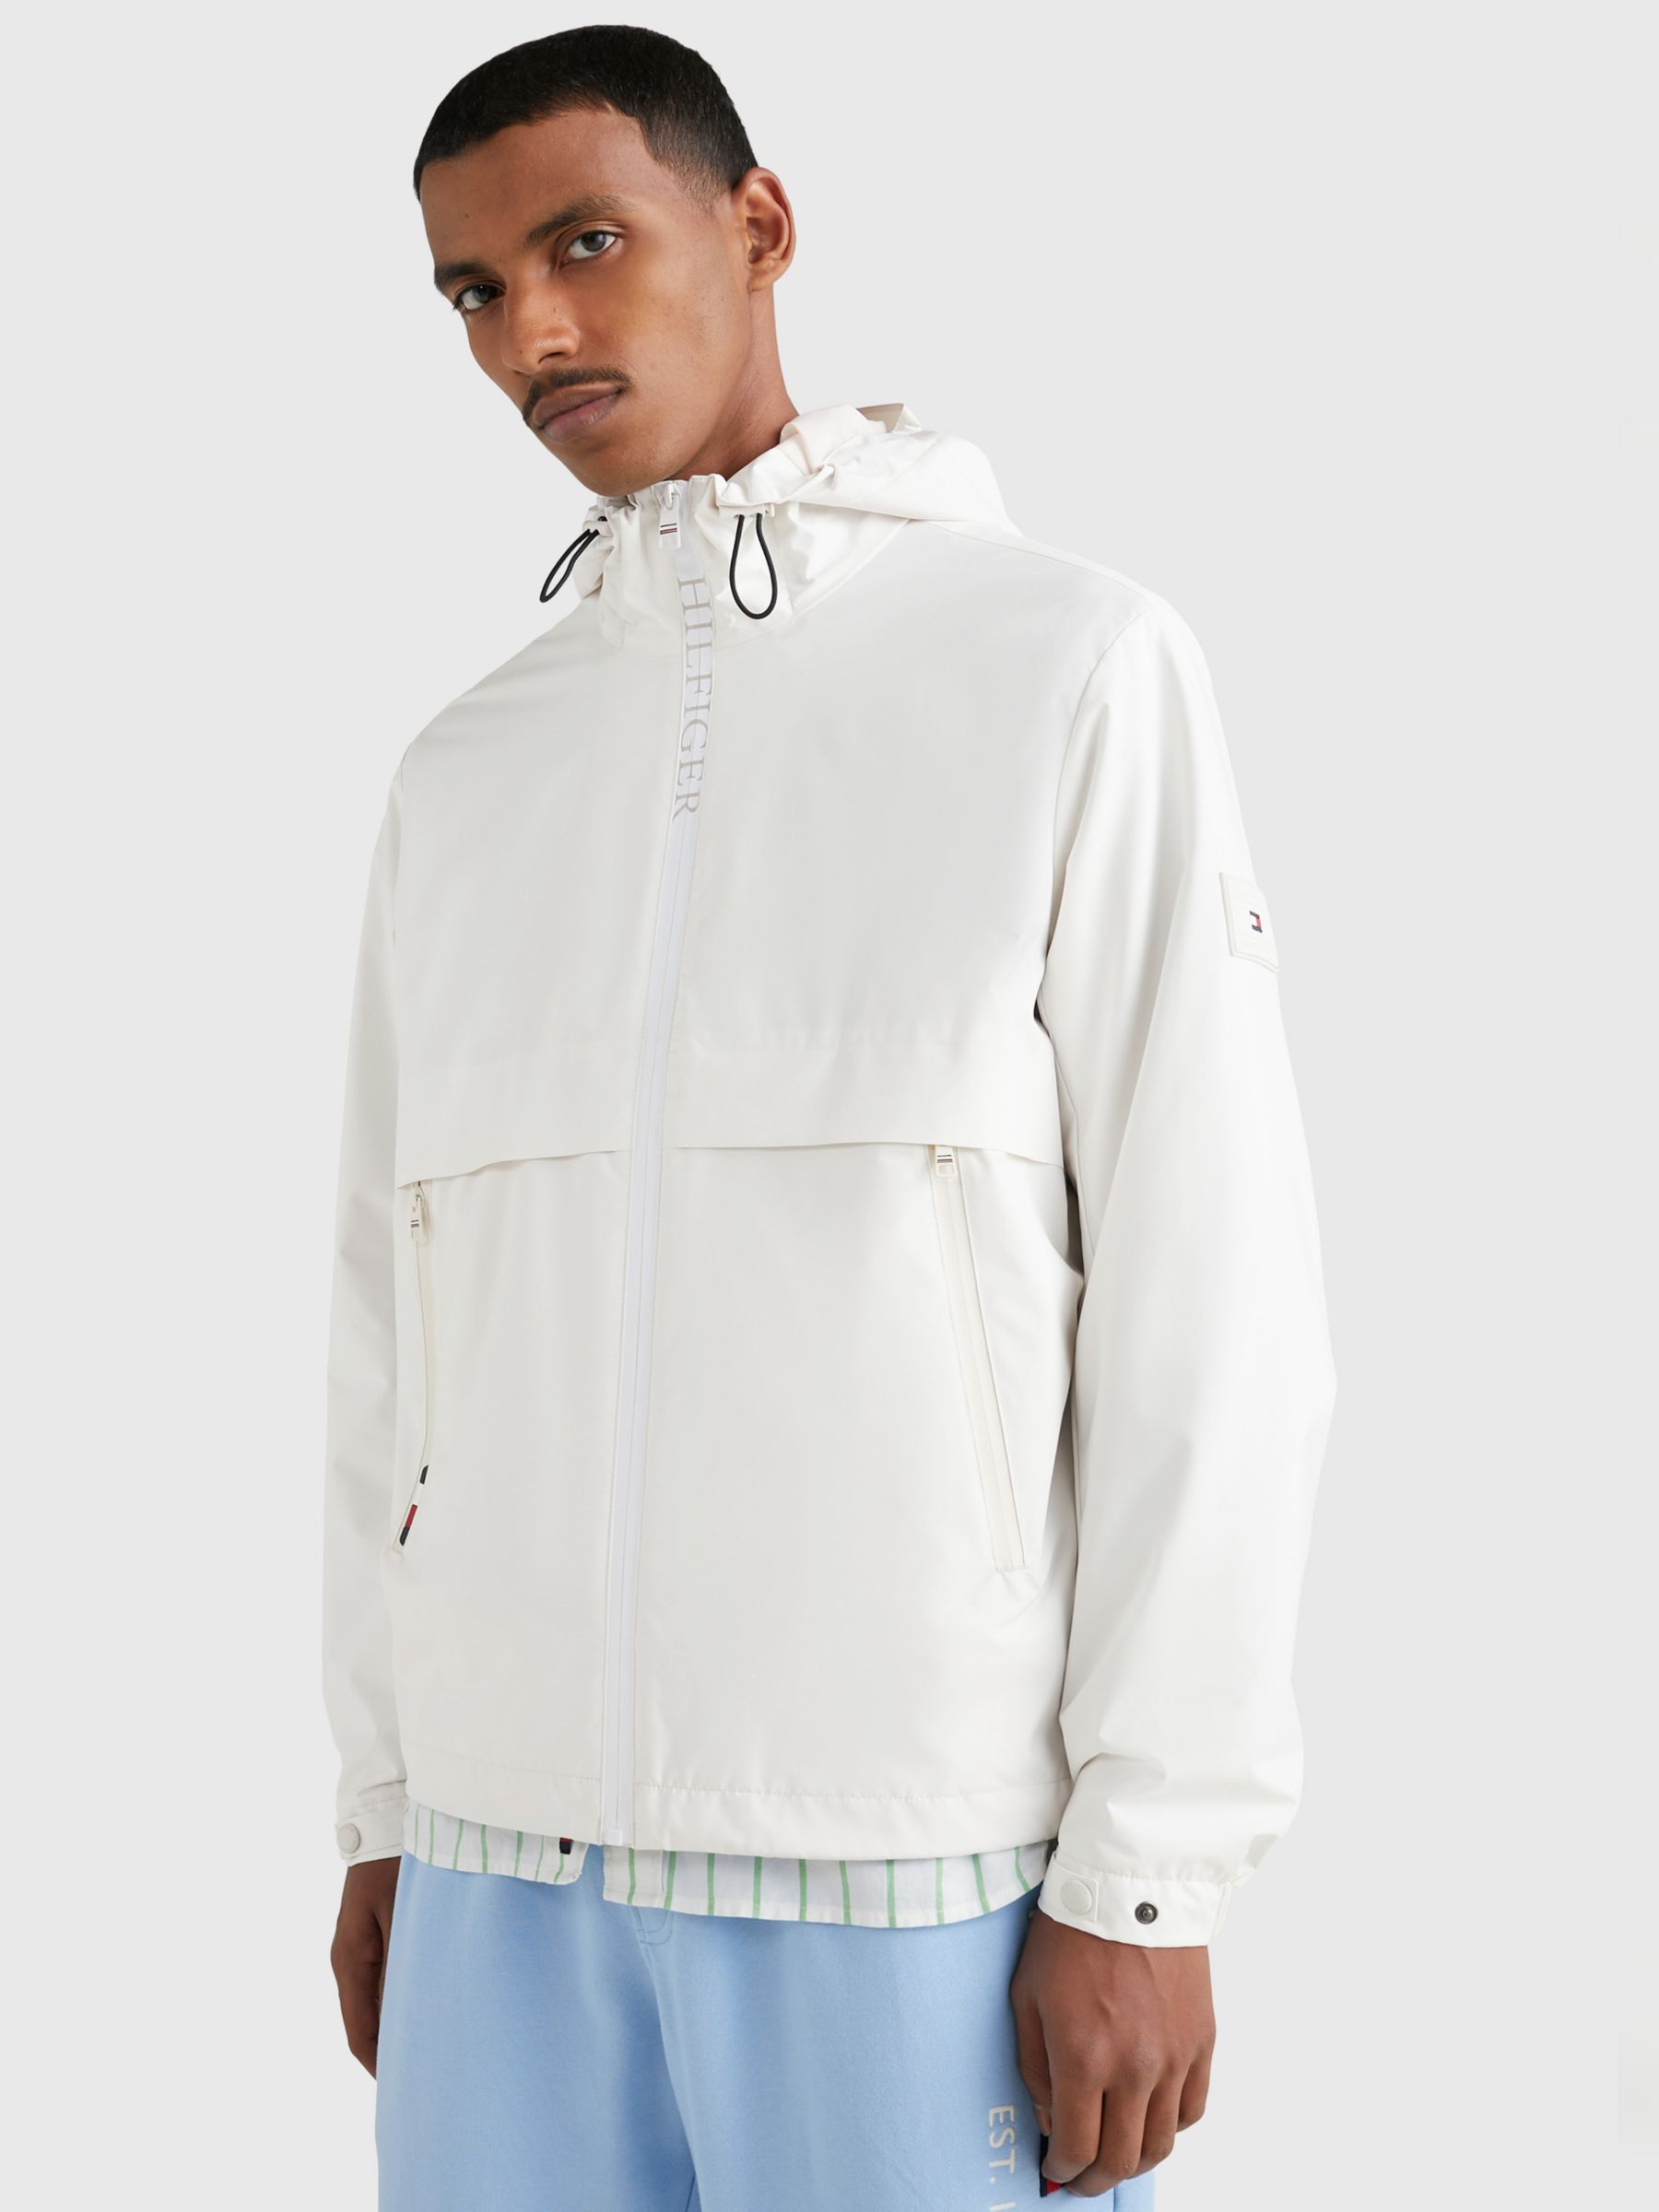 Tommy Hilfiger Protect Sail Hooded Jacket, Weathered White, S